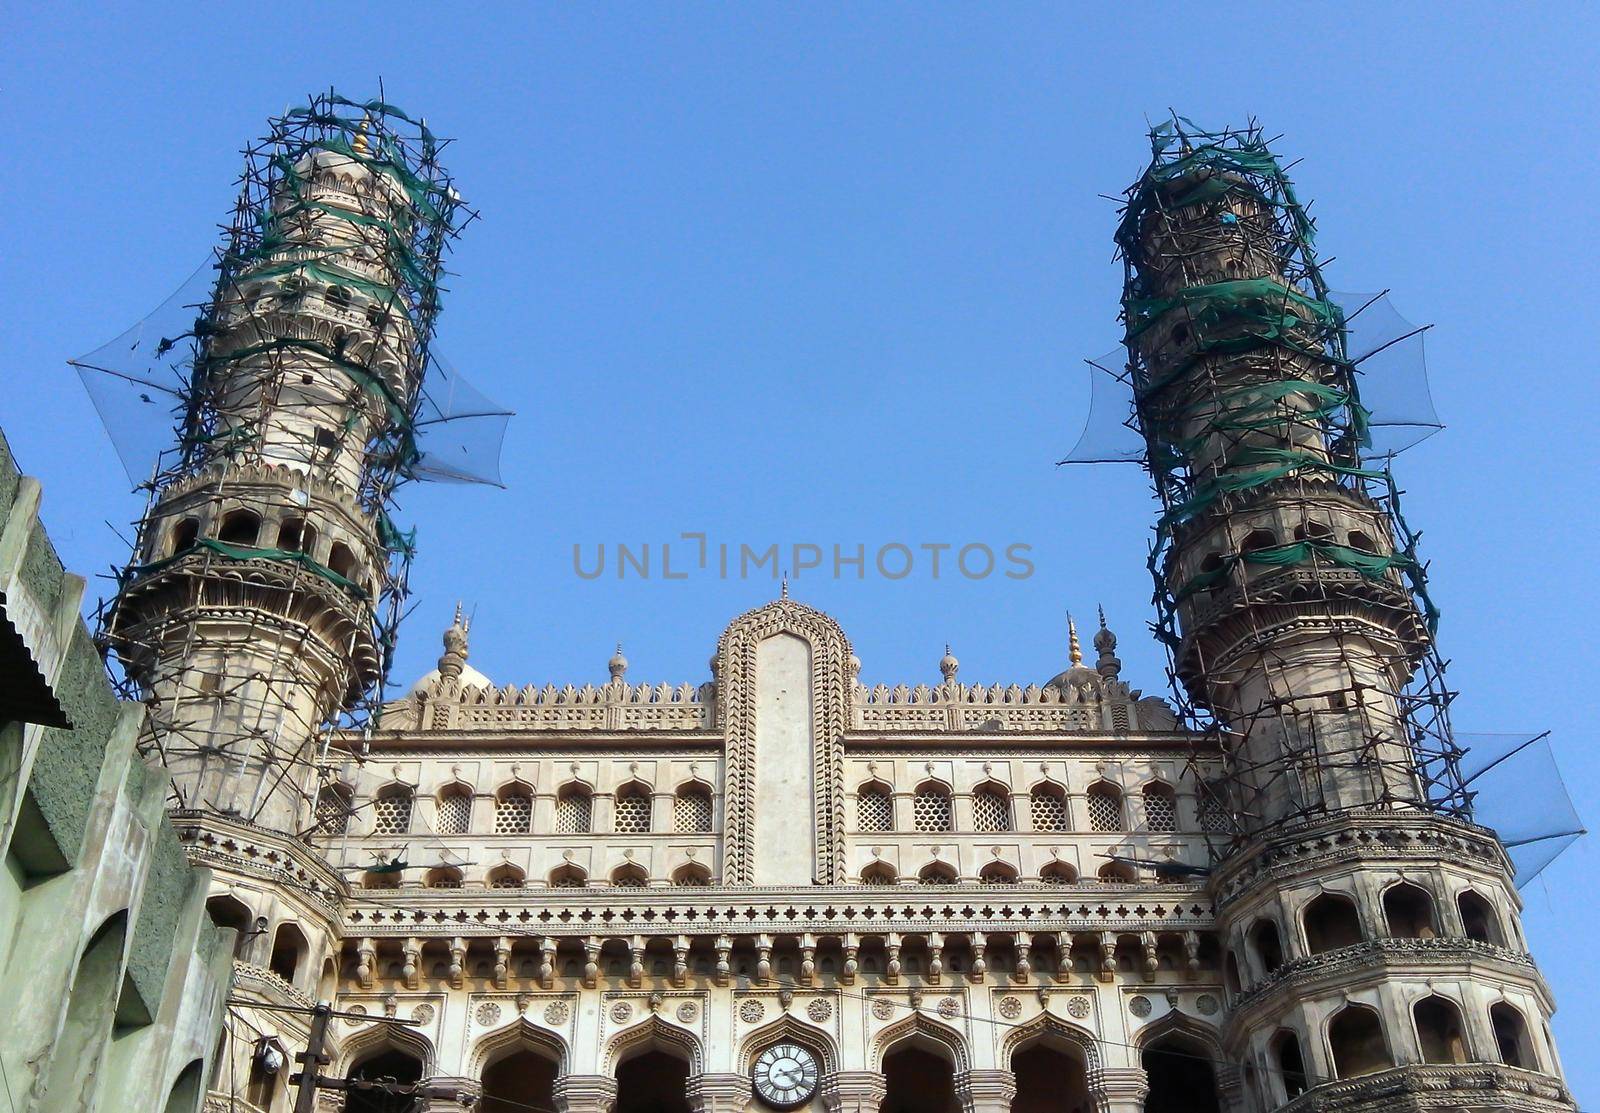 Hyderabad City, Andhra Pradesh, India- November 18, 2016: Editorial: Pedestrians walking at the street of Hyderabad with background of Charminar, which is a monument and mosque,constructed in 1591.